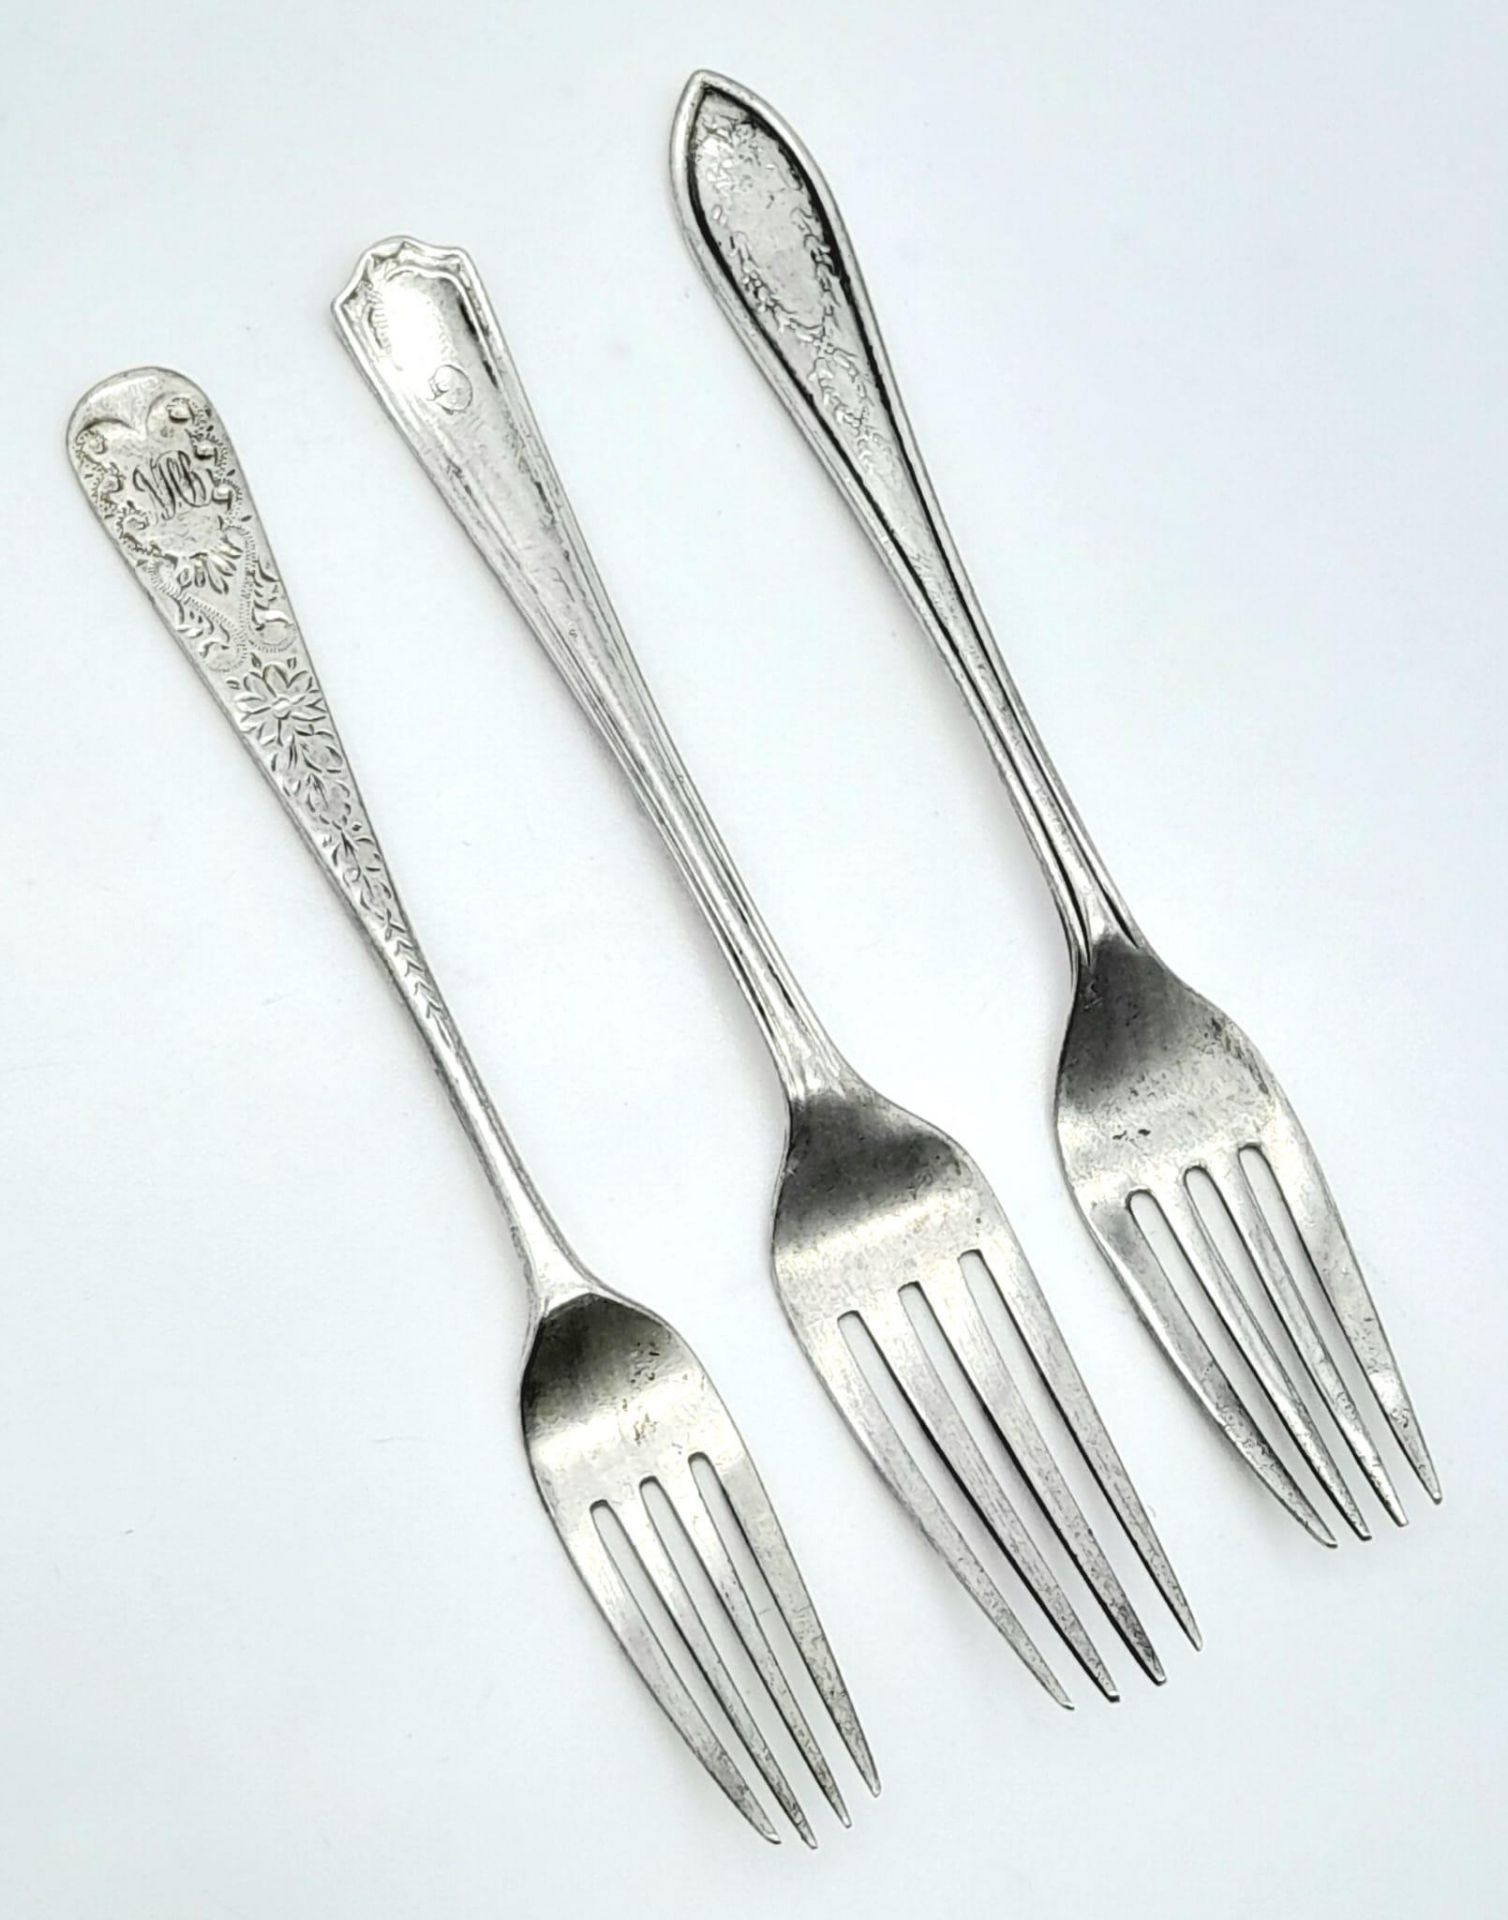 An antique eclectic collection of sterling silver forks with different designs. Come with full